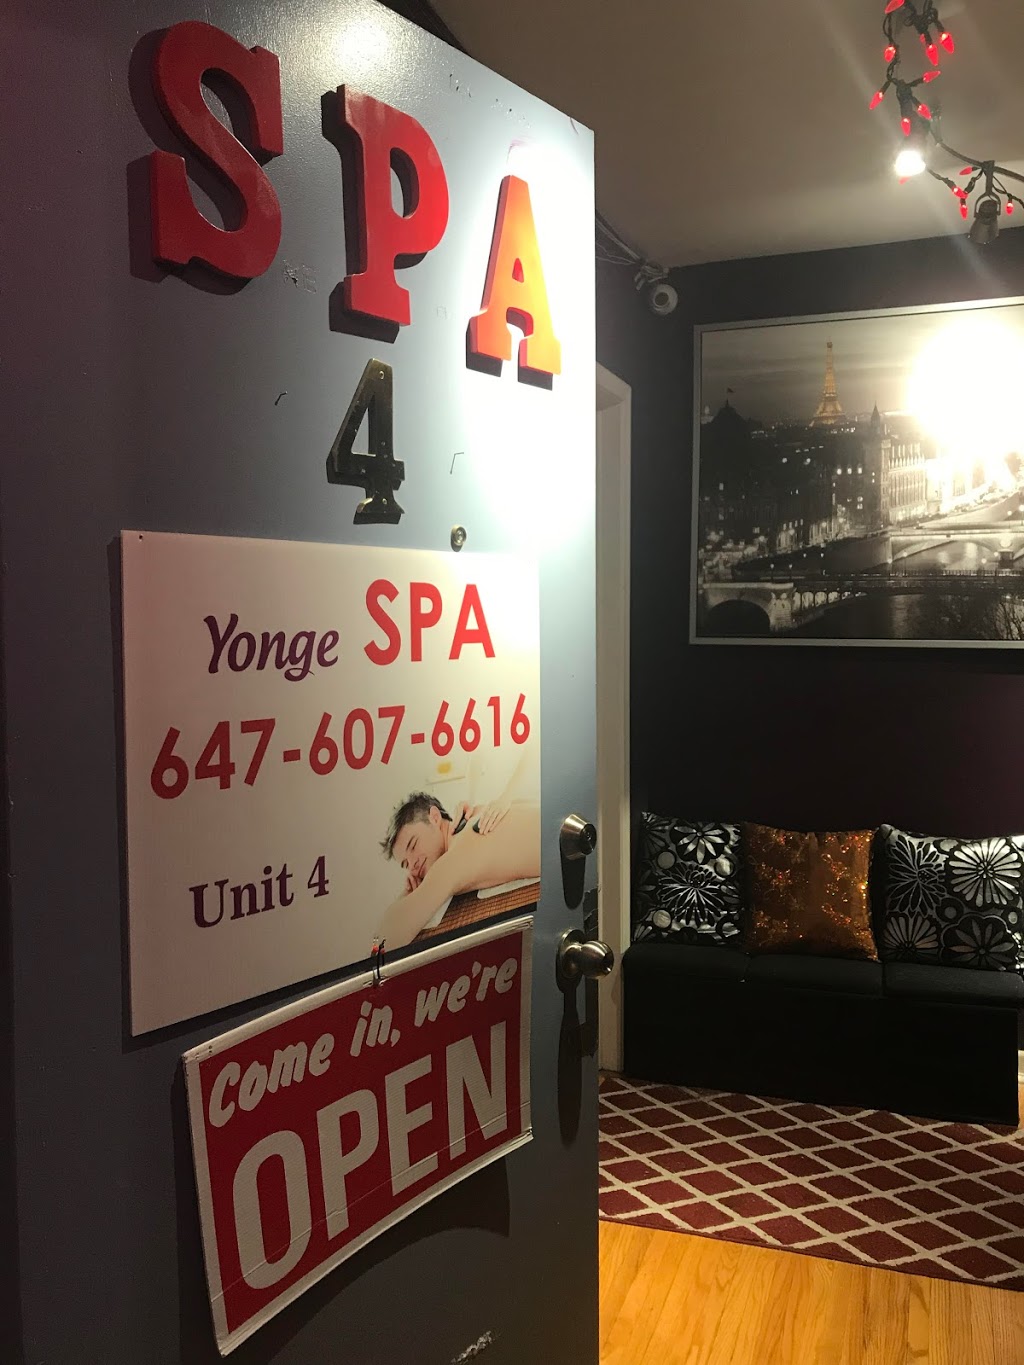 Yonge Spa / Asian | spa | Behind Laterna restaurants Back entrance only, 6311 Yonge St #4, North York, ON M2M 3X7, Canada | 6476076616 OR +1 647-607-6616